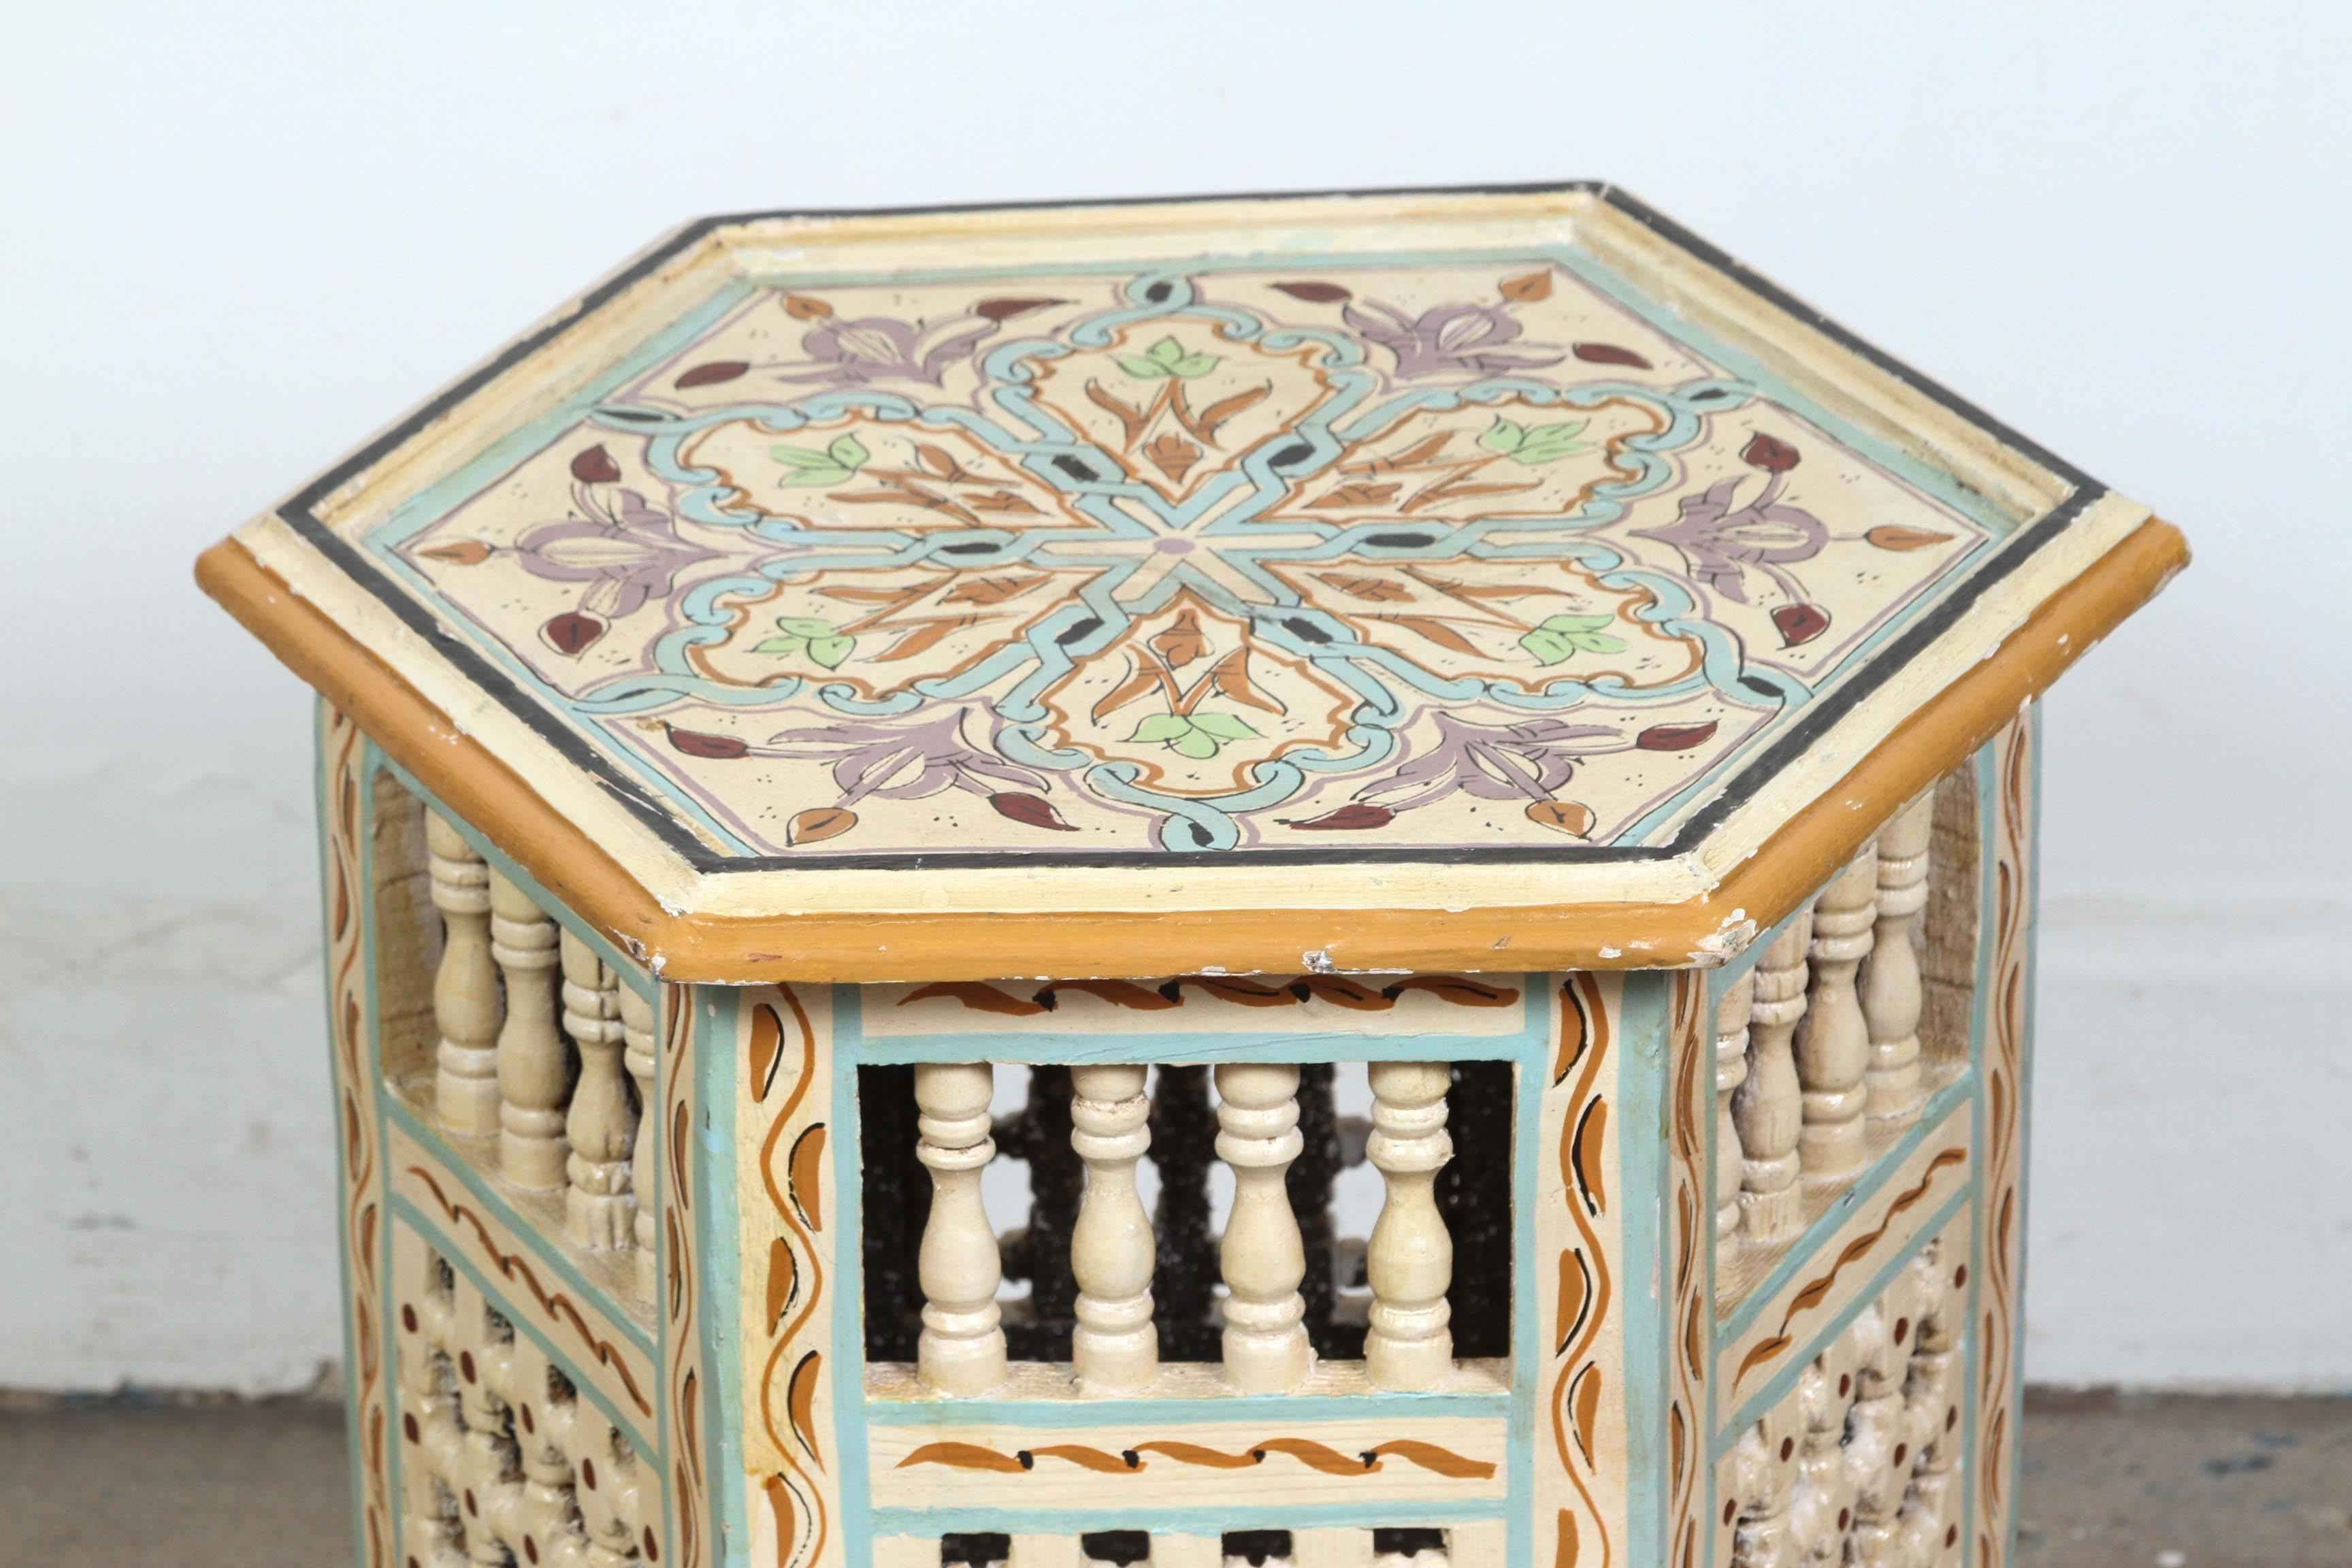 Hexagonal shape, Moroccan vintage side table hand-painted on ivory background, floral and geometric designs and moucharabie cutout on the sides with Moorish arches.
handcrafted in Morocco by skilled artisans.
A pair is available price is for one,